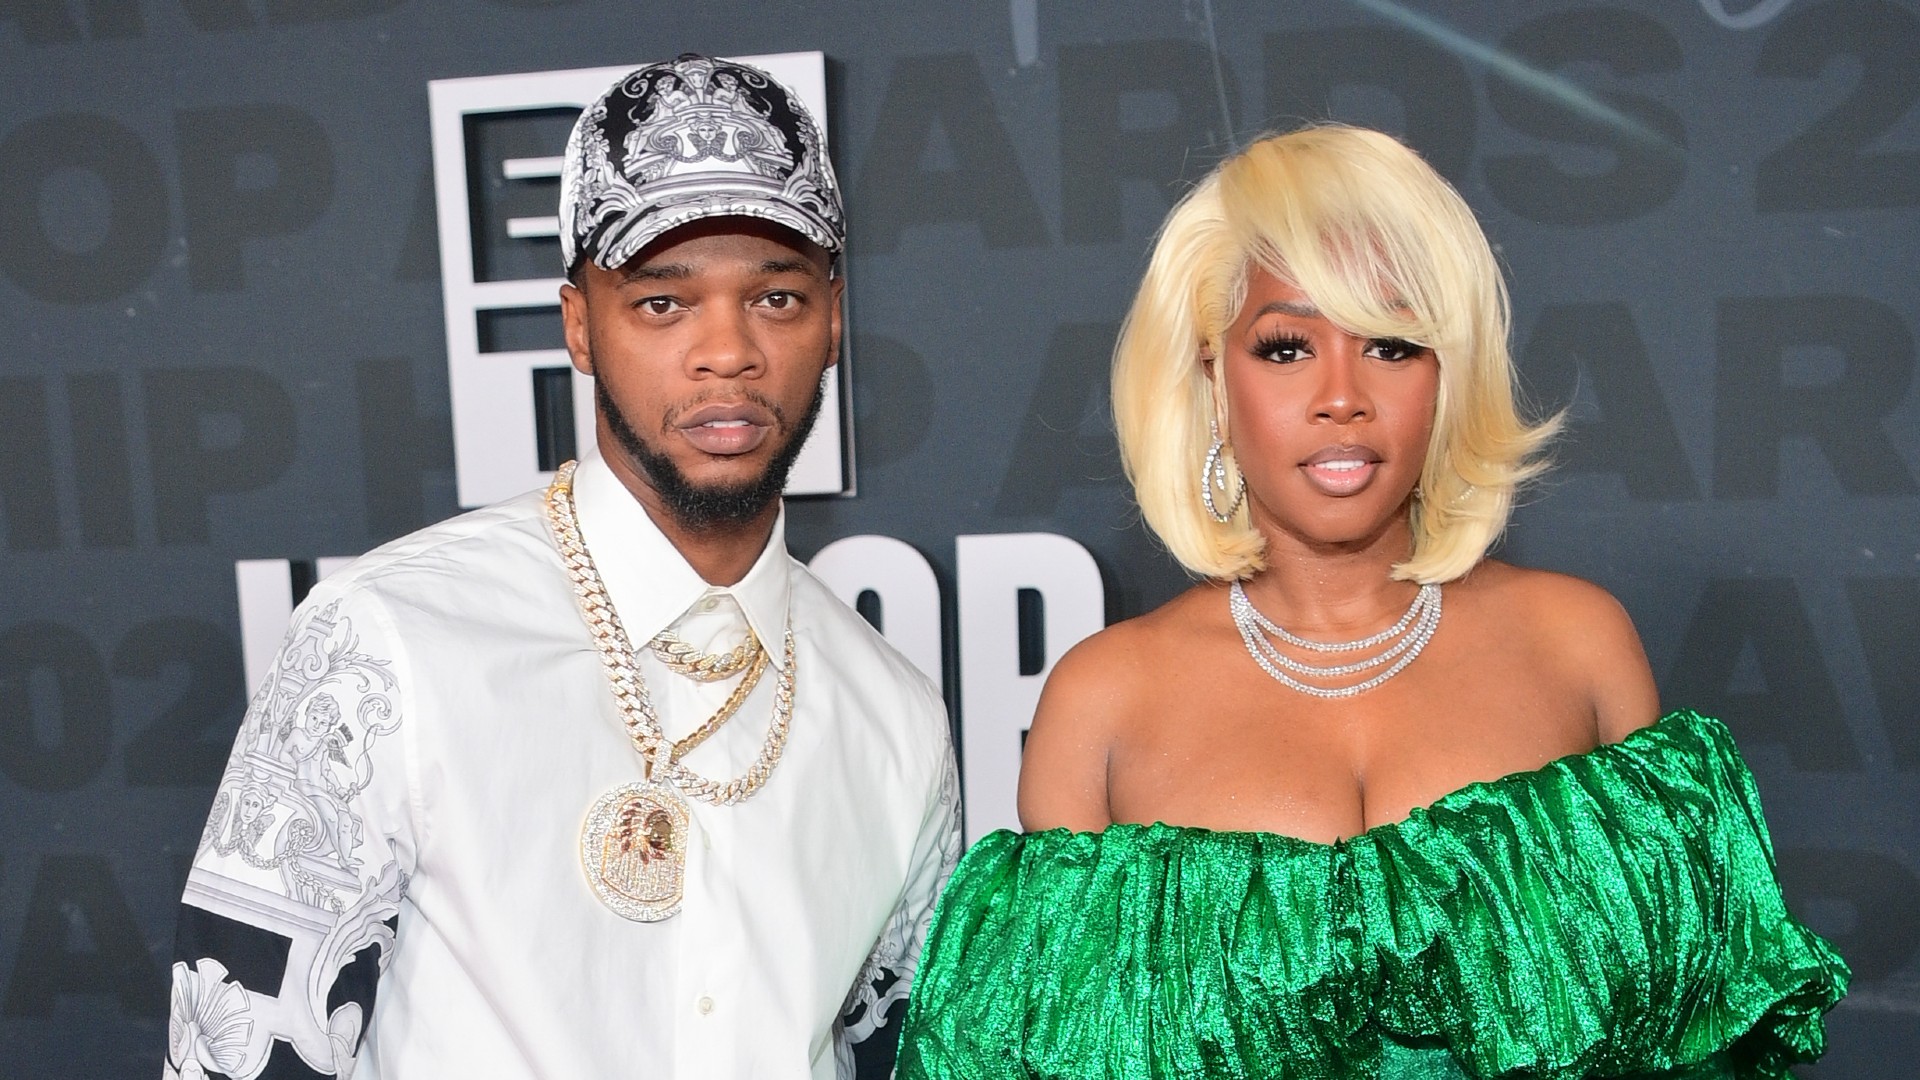 Remy Ma And Papoose Spark Breakup Rumors Over Alleged Infidelity Claims